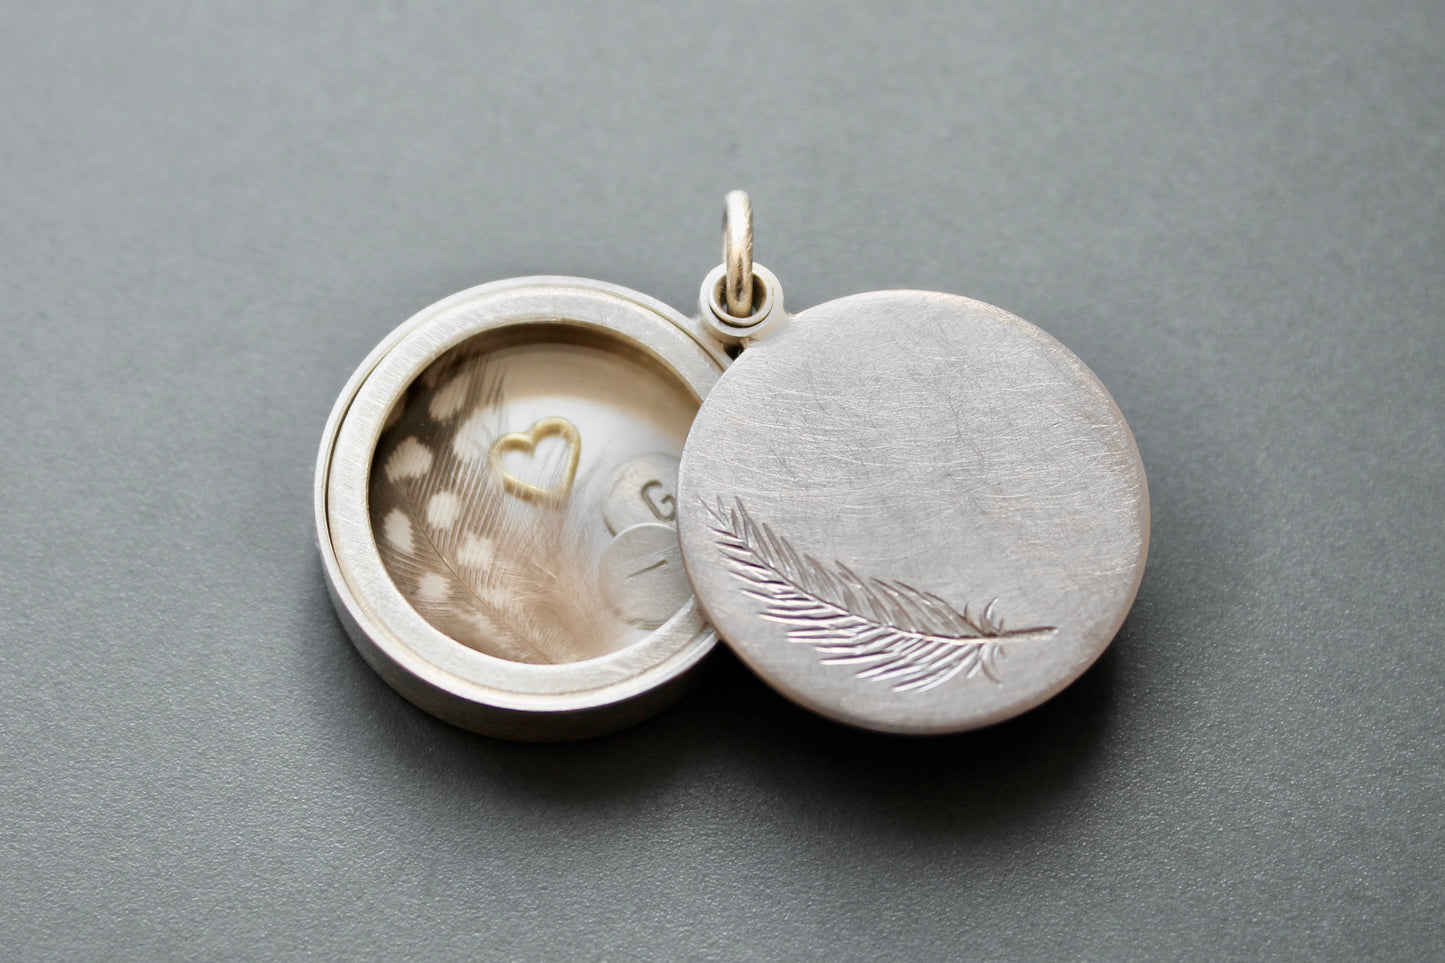 secret message locket filled with silver letter plates, a tiny feather and a golden heart